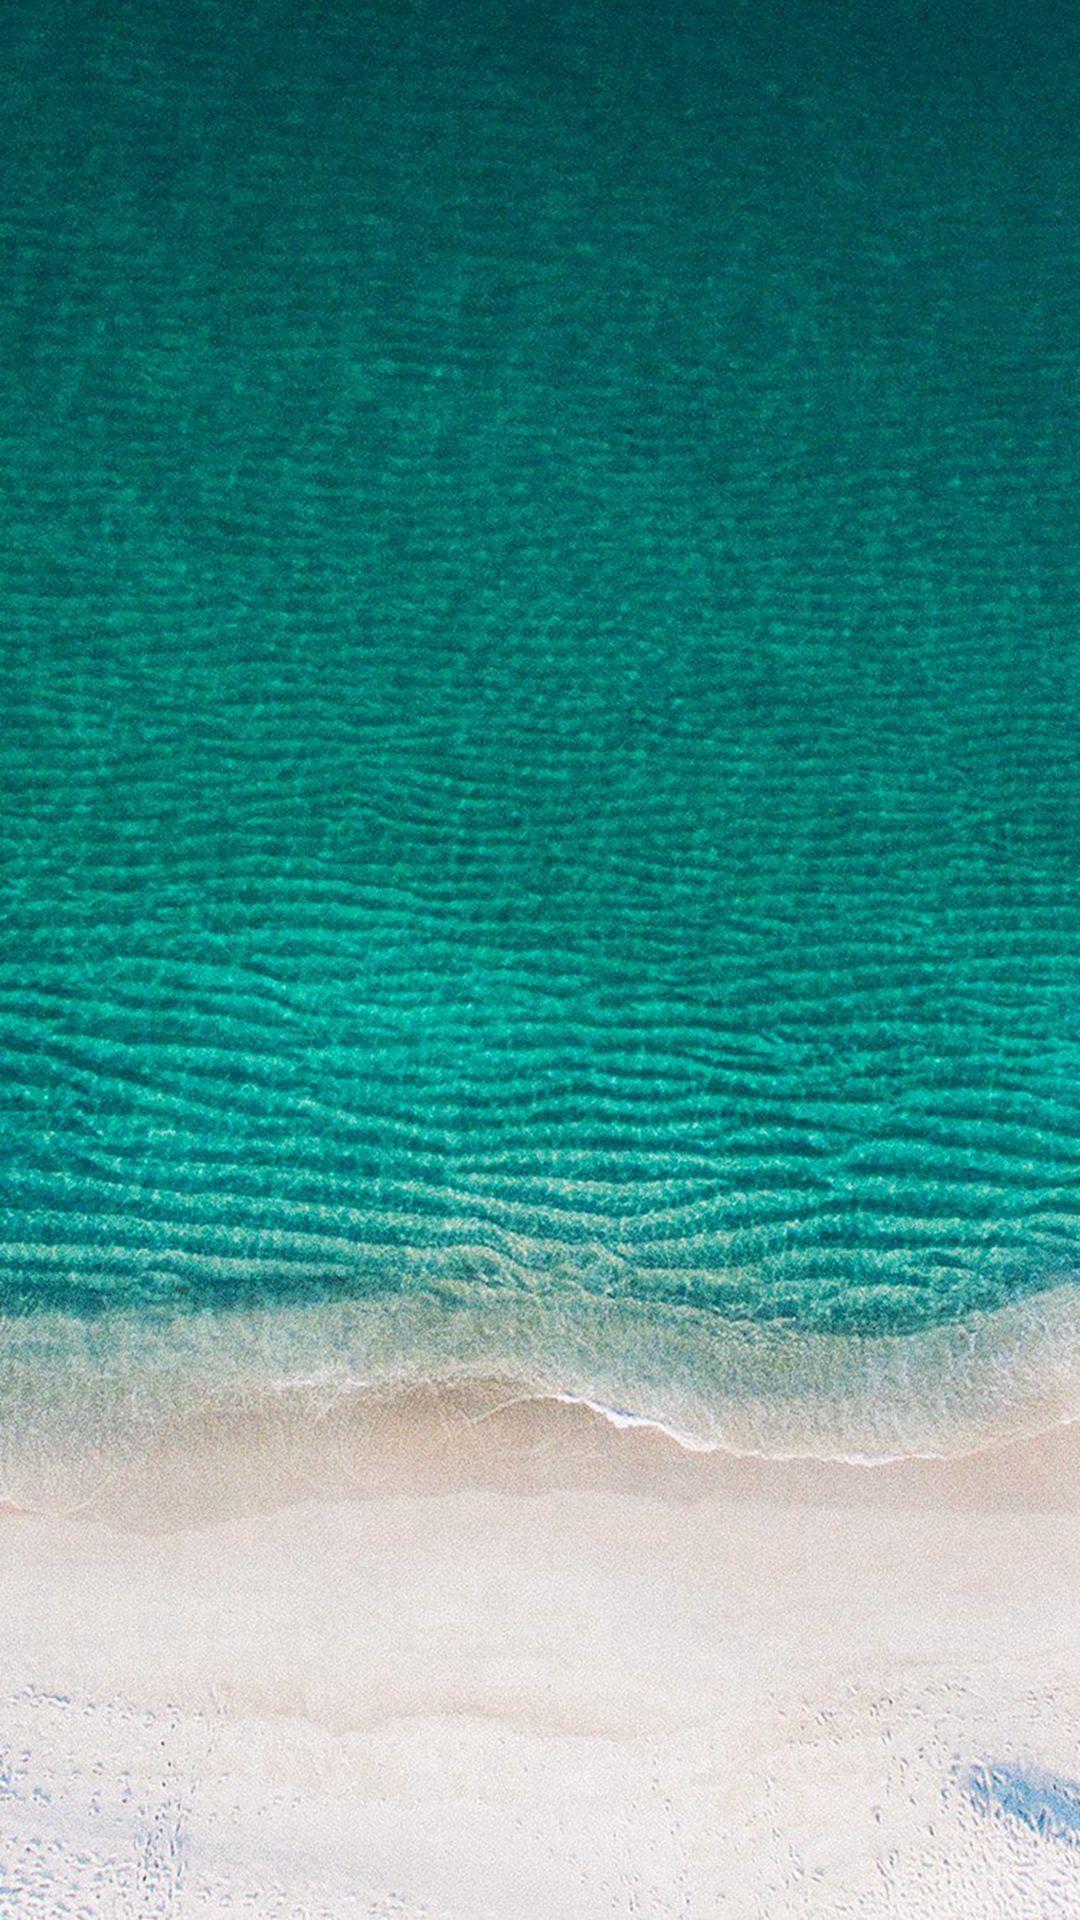 Tropical Sand Beach Lagoon Coastline Sea Waves Turquoise Water Trees Willow  Overhanged Horizon Landscape Nature 4k Ultra Hd Wallpapers High Quality :  Wallpapers13.com